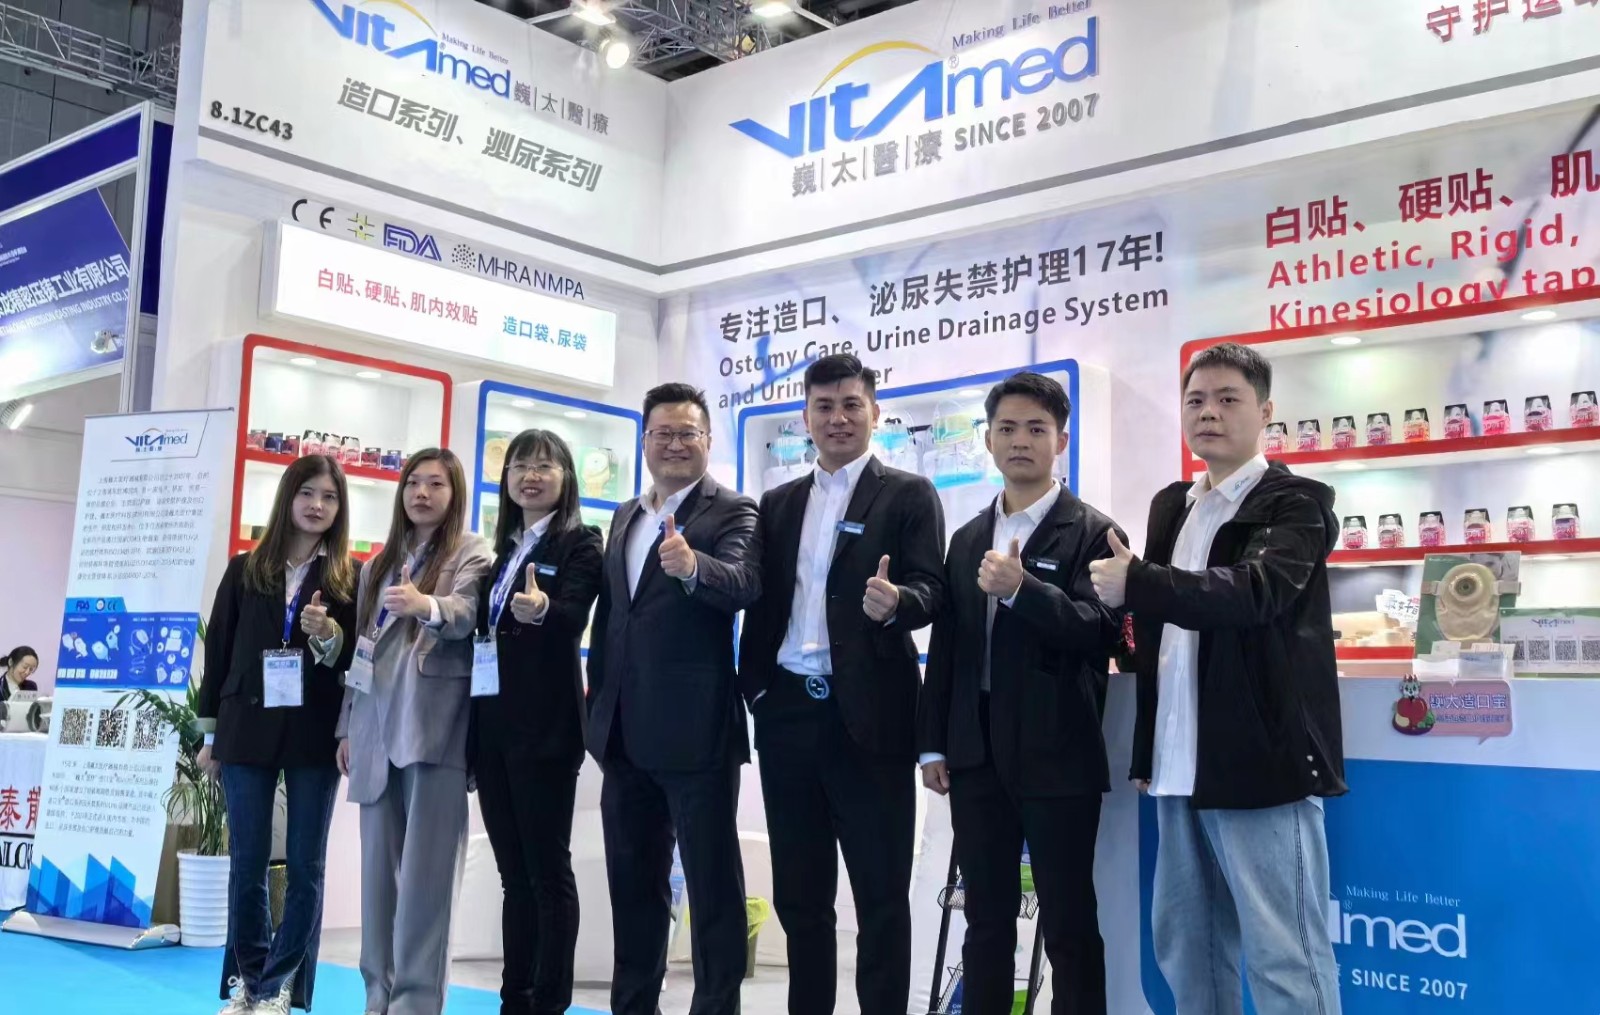 VITAIMED's 89th CMEF Shanghai Exhibition concluded perfectly and achieved great success